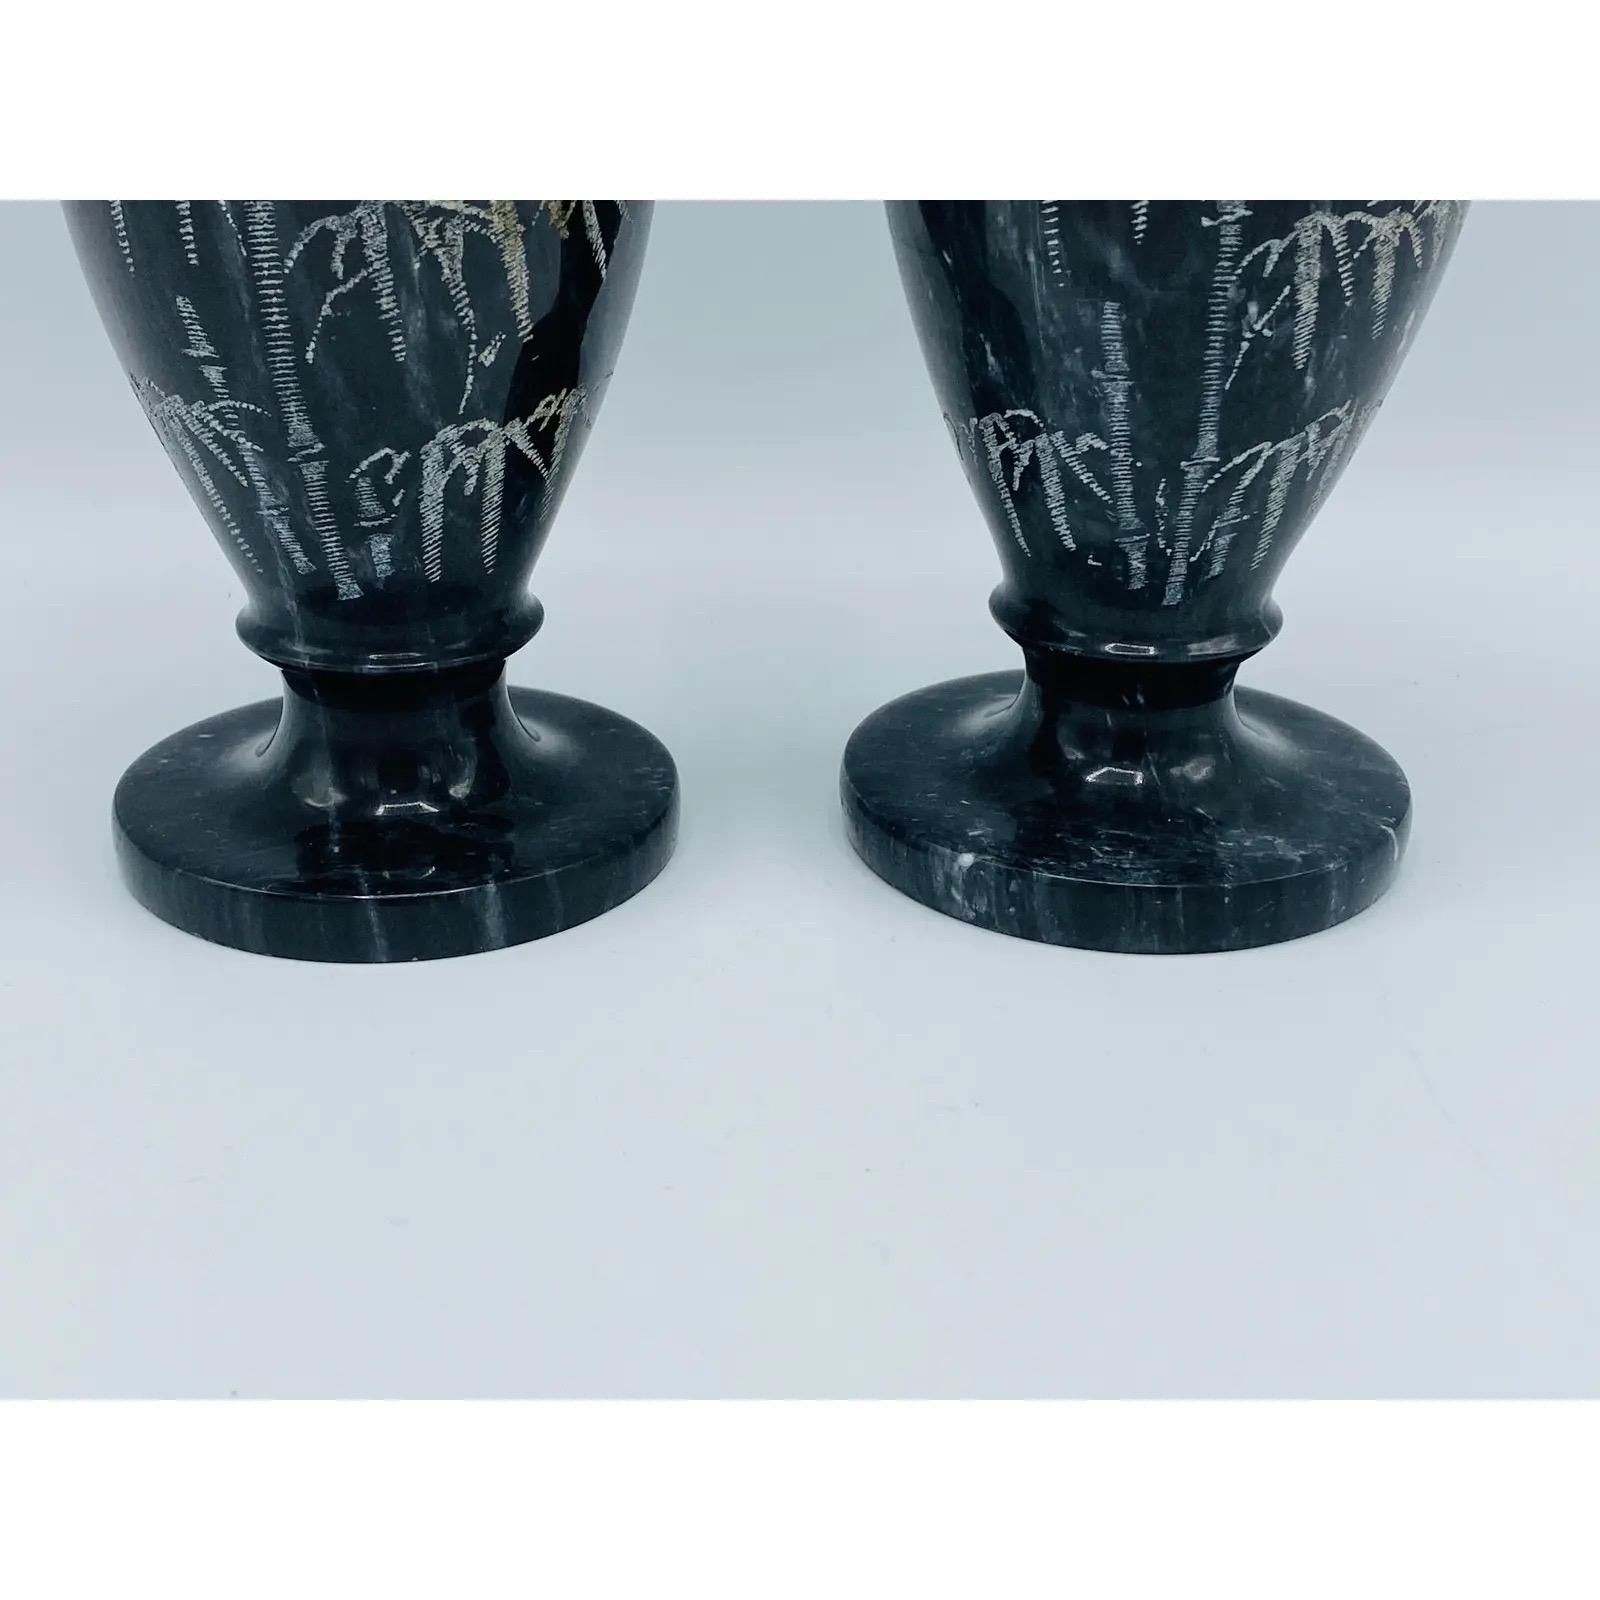 Hand-Carved 1960s Italian Marble Vases With Etched Bamboo Motif, Pair For Sale